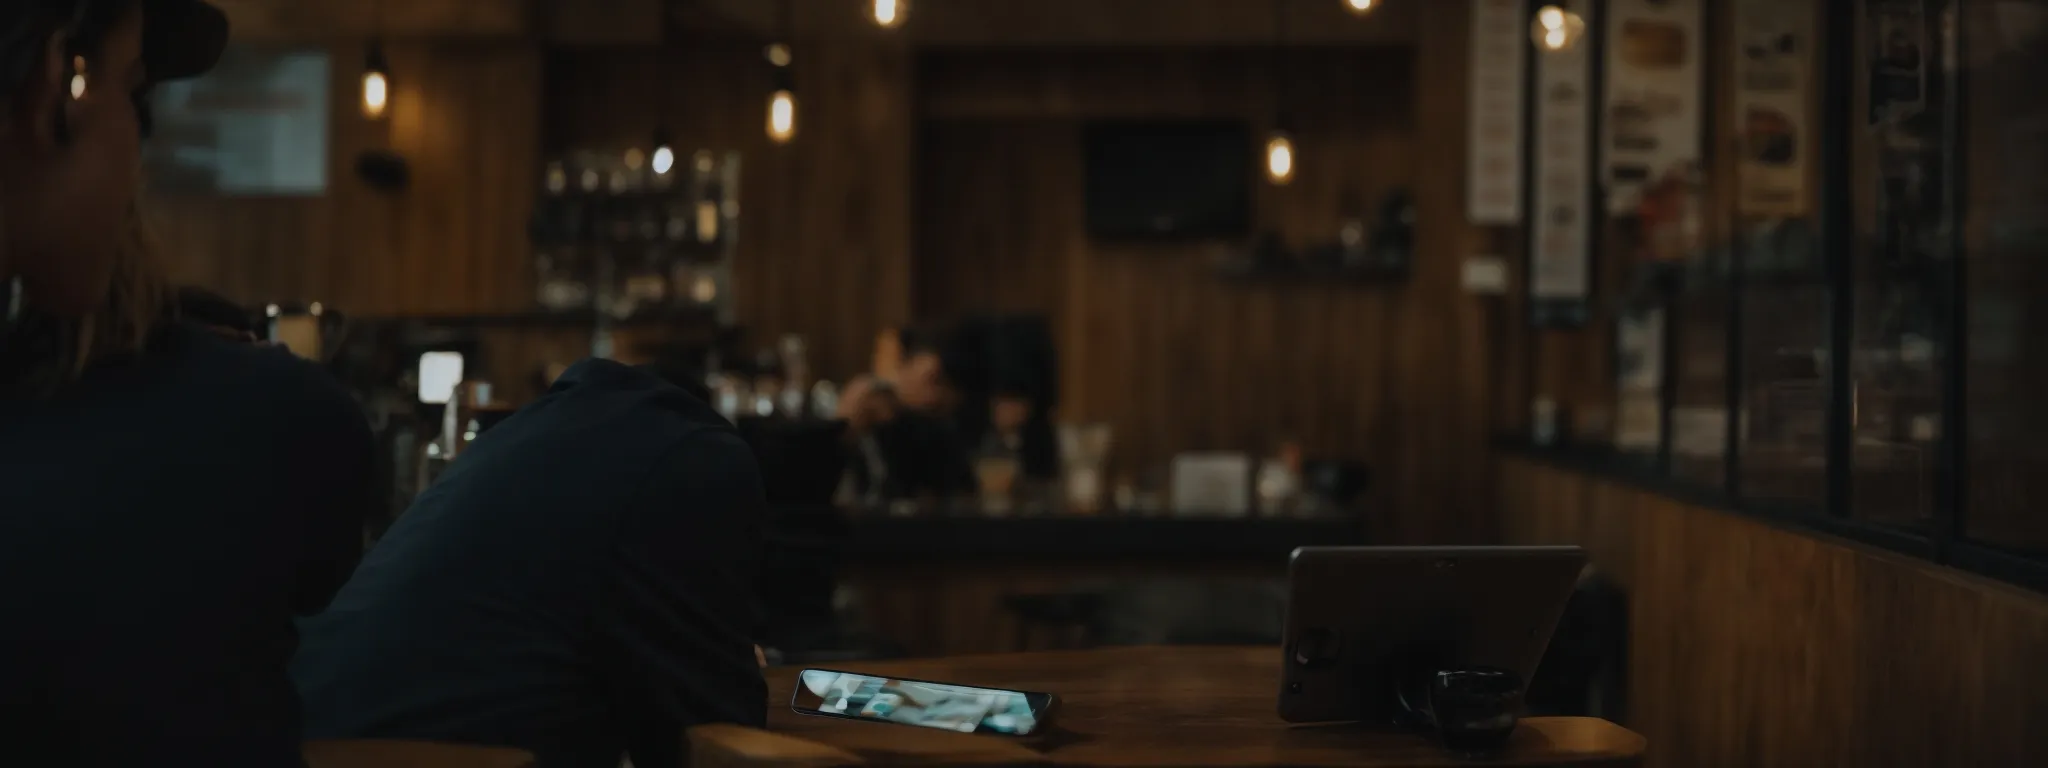 a small business owner reviews customer feedback on a tablet in a cozy coffee shop.